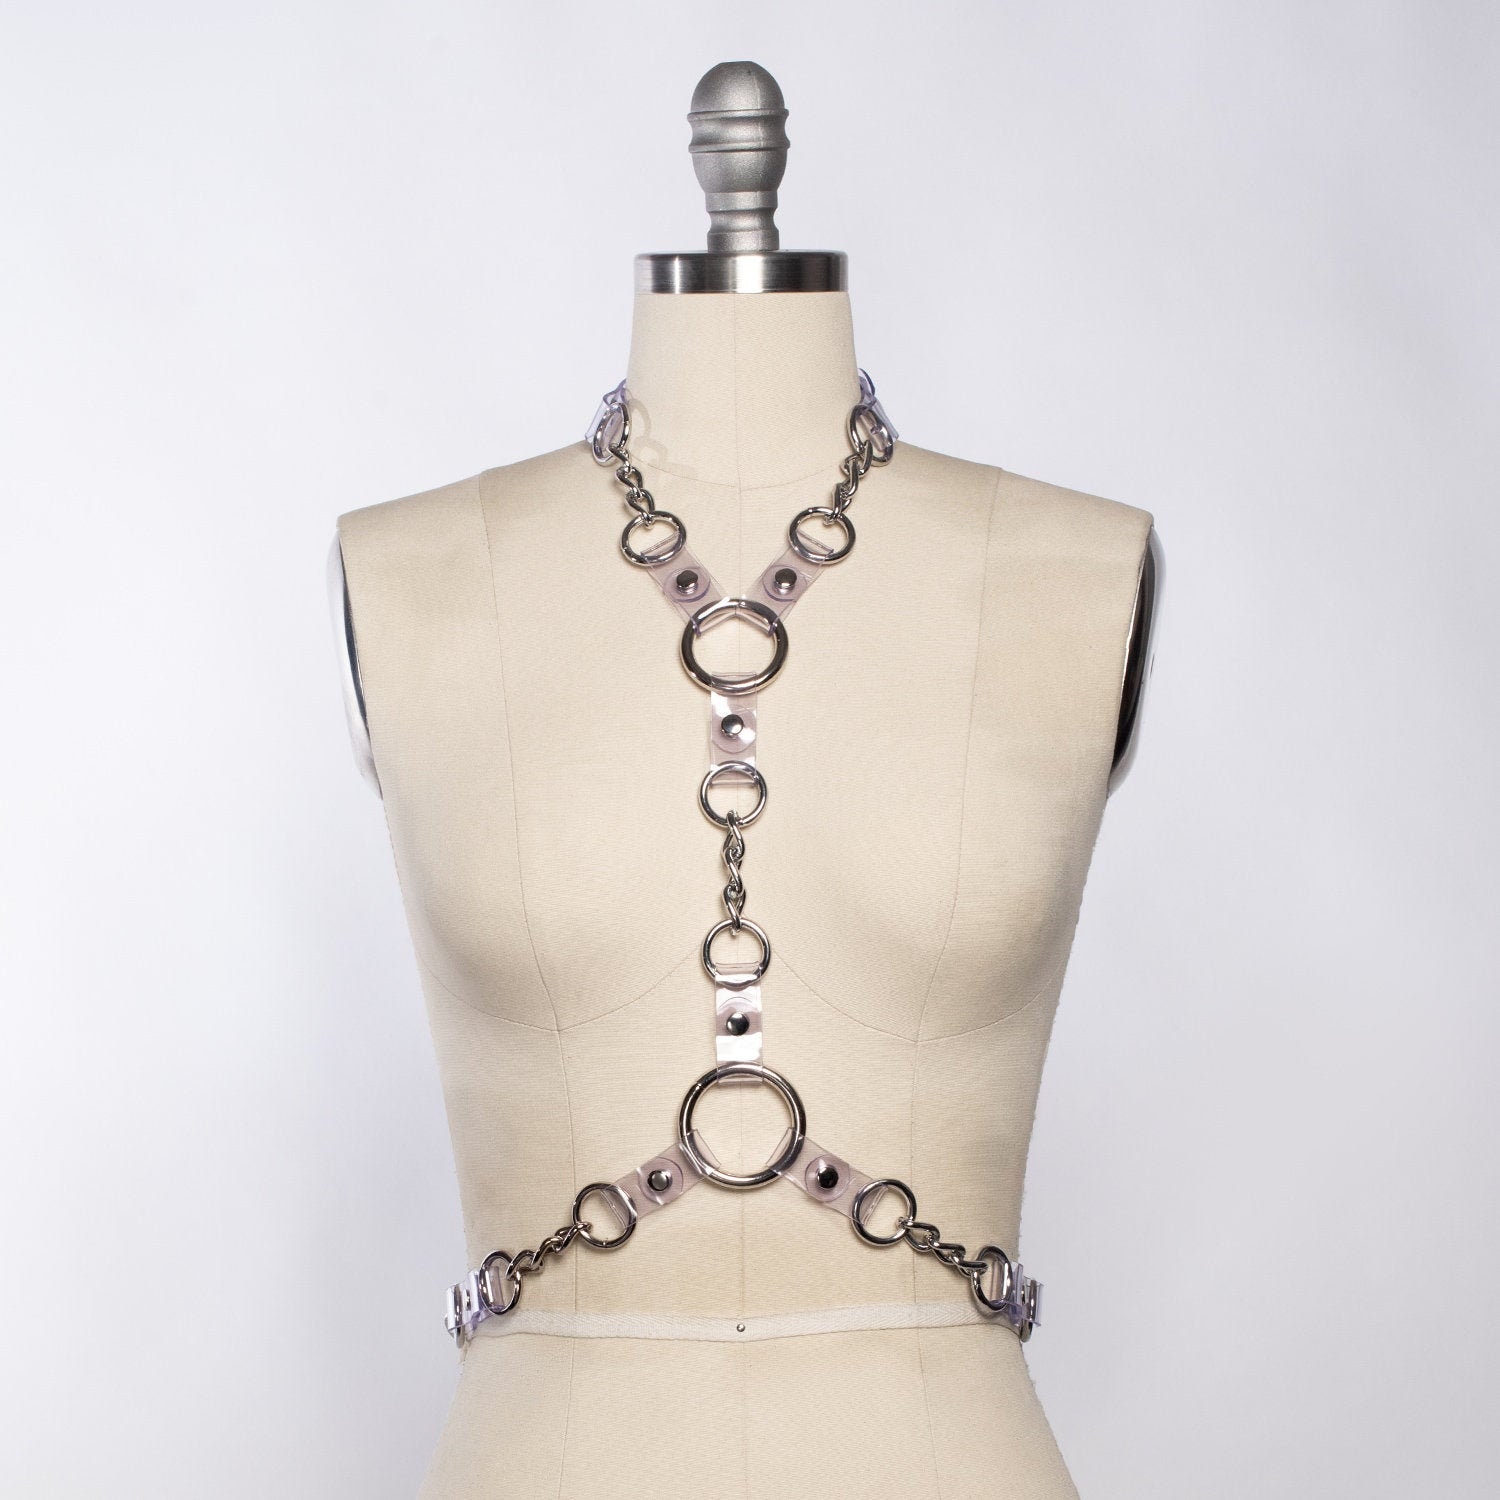 Industrial Chain Harness Clear Pvc Harness Chains Metal - Etsy